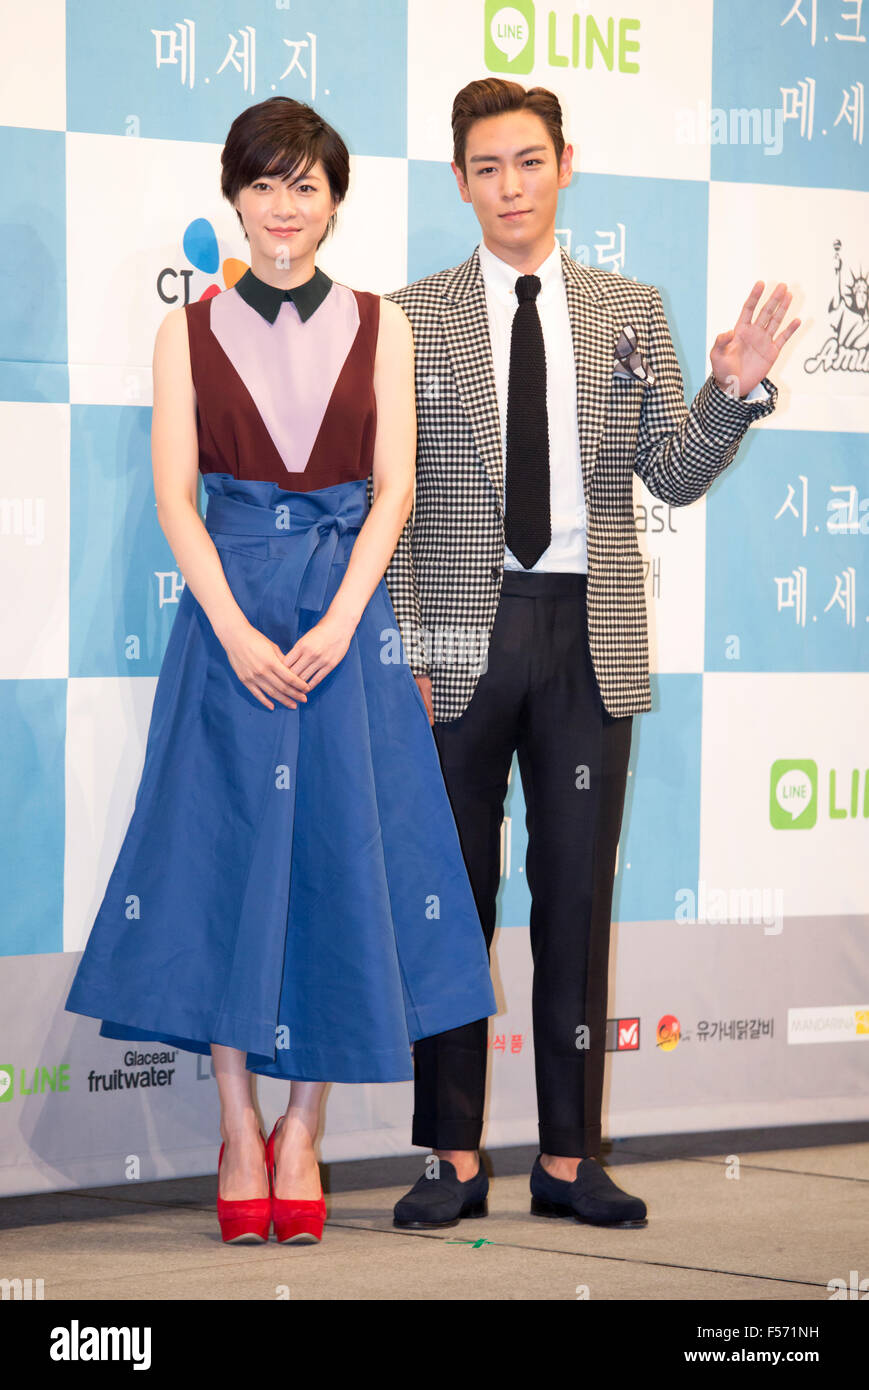 Juri Ueno and T.O.P (Big Bang), Oct 28, 2015 : Japanese actress Juri Ueno (L) and South Korean actor and singer T.O.P pose during a press presentation of new drama, 'Secret Message' in Seoul, South Korea. 'Secret Message' is a Korean-Japanese web drama series which will air online from early November. © Lee Jae-Won/AFLO/Alamy Live News Stock Photo